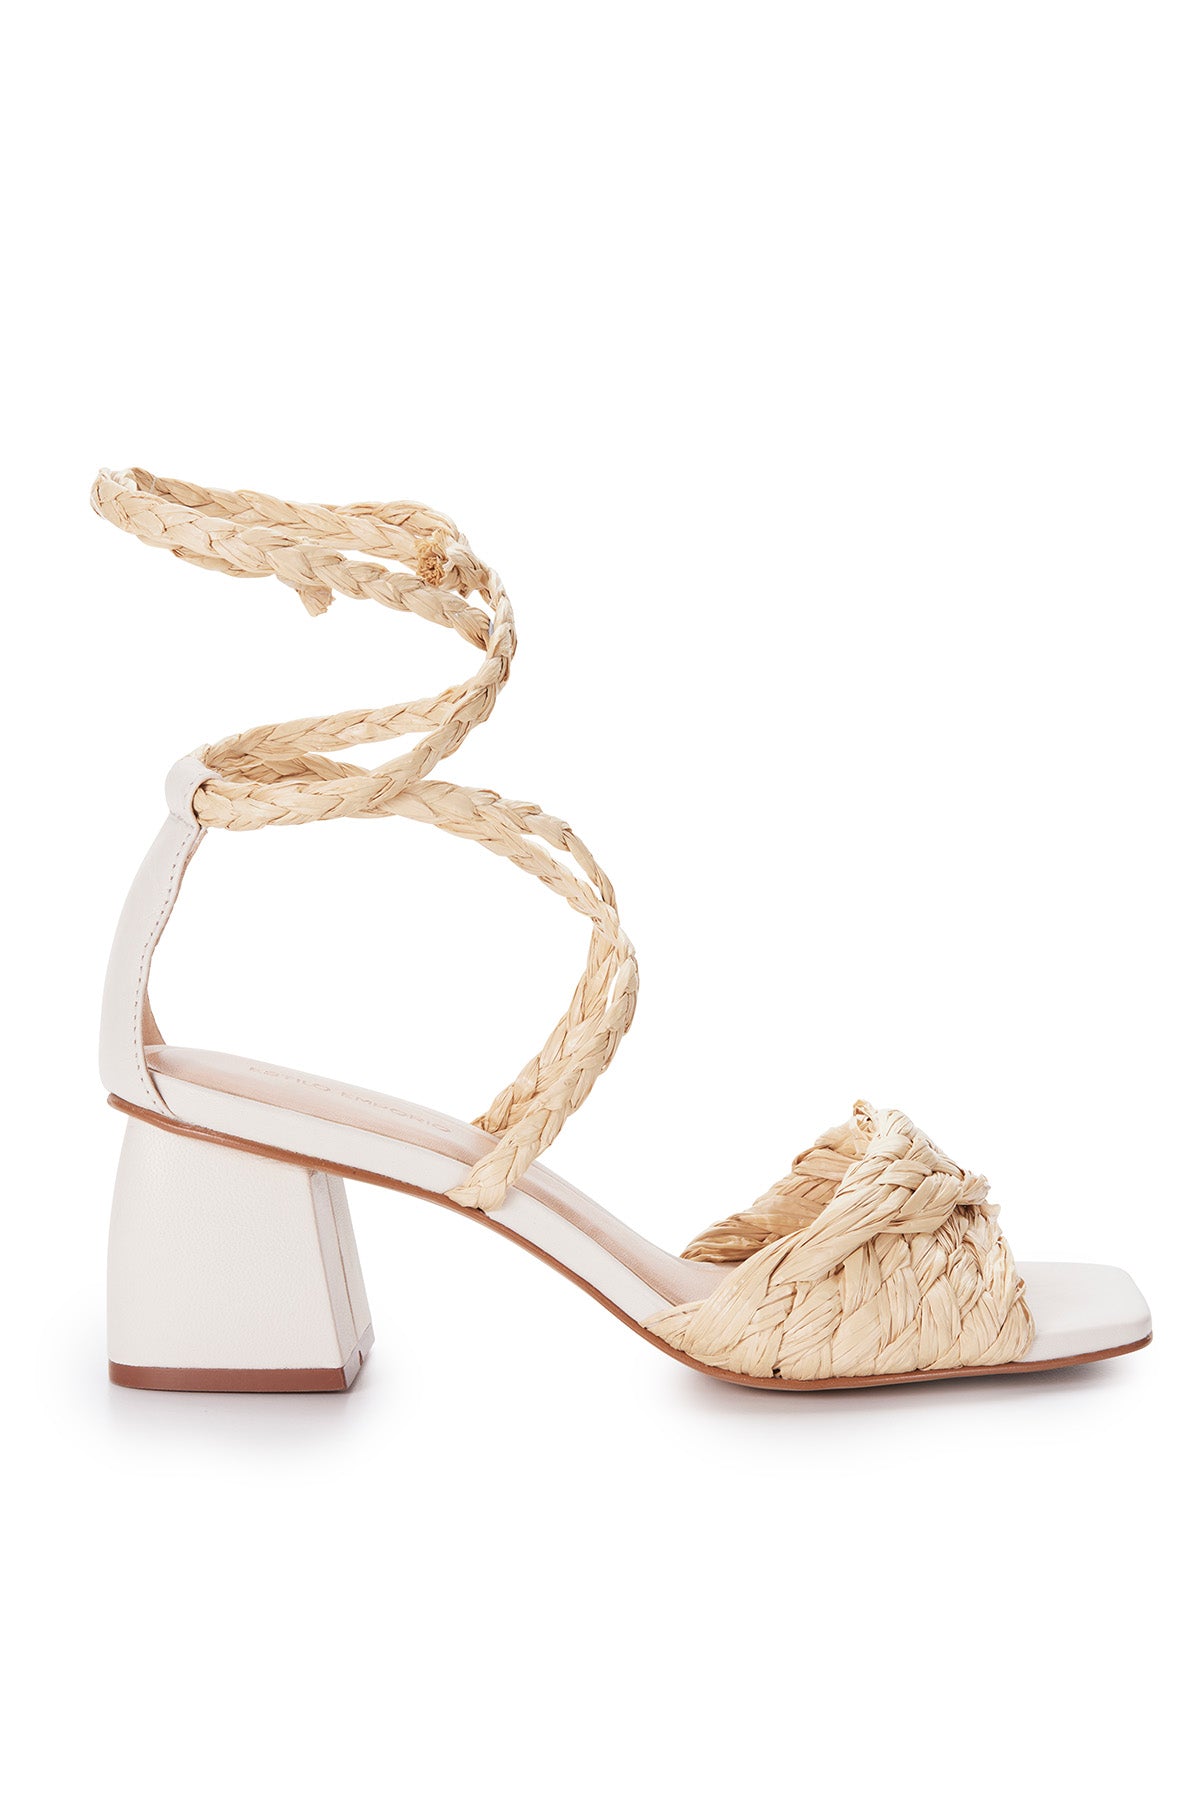 Looma Heel - Off White/Natural